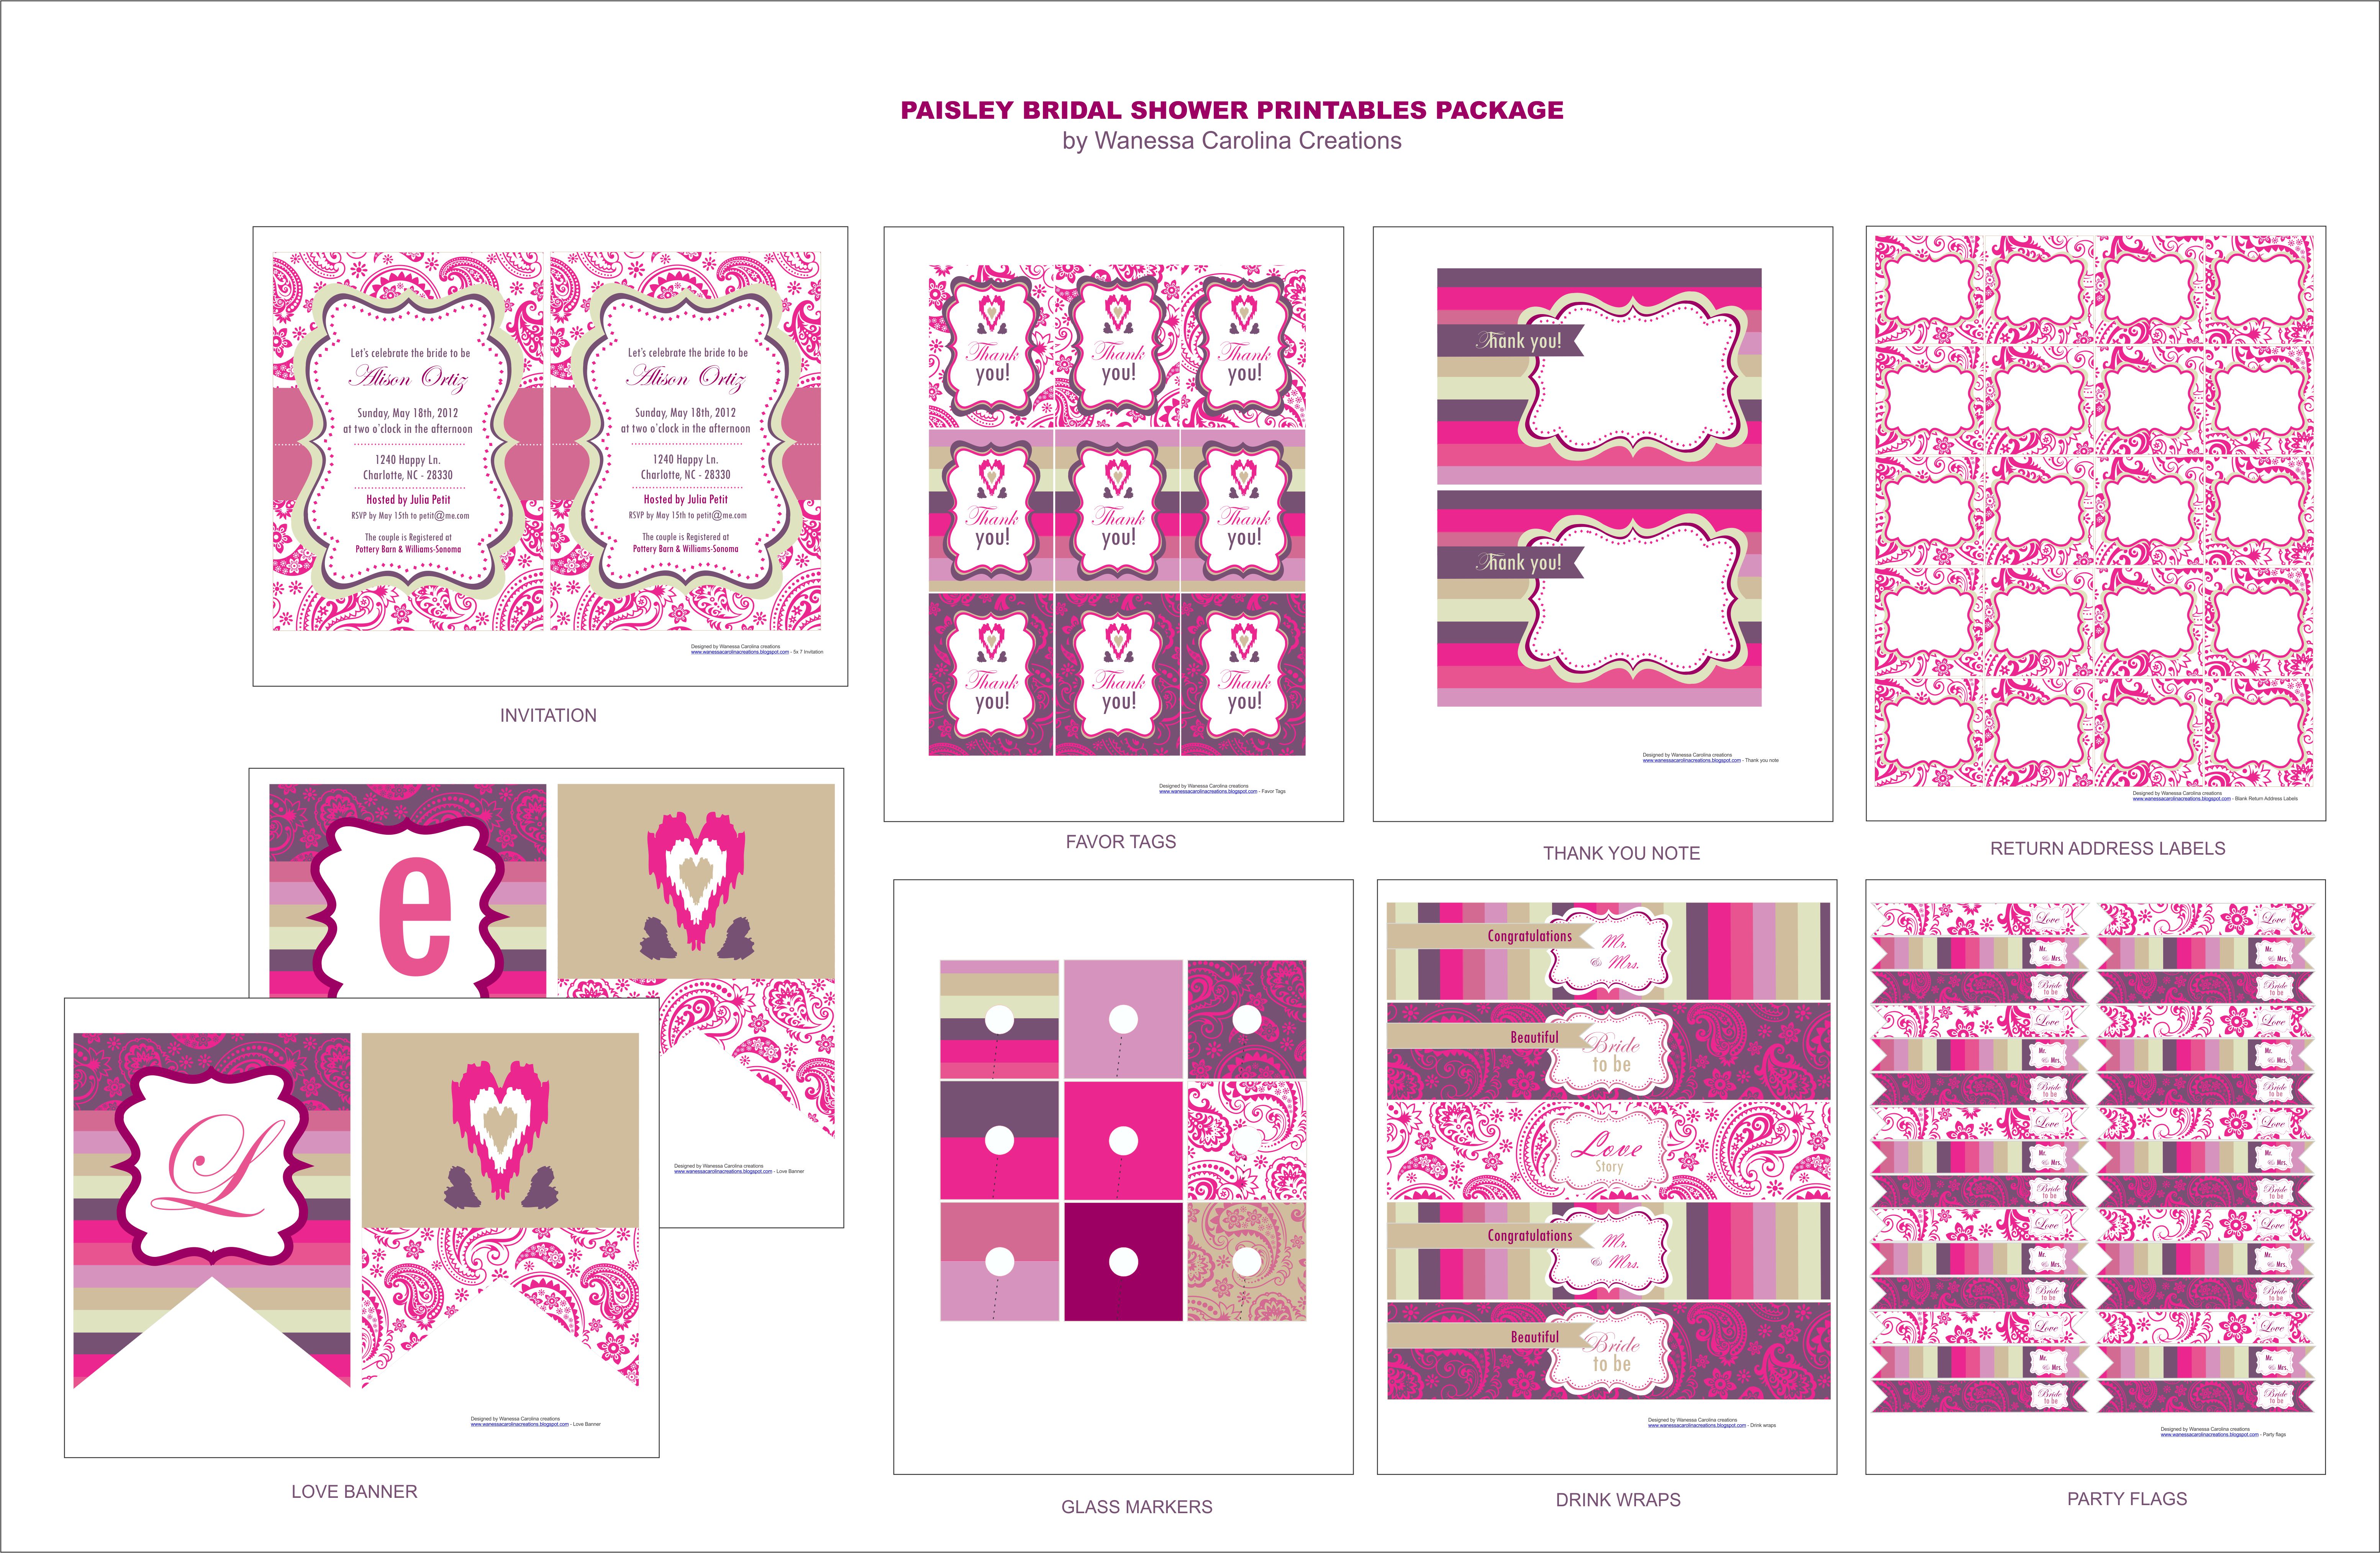 Thank you, Wanessa, the printables are stunning, and I love your use ...